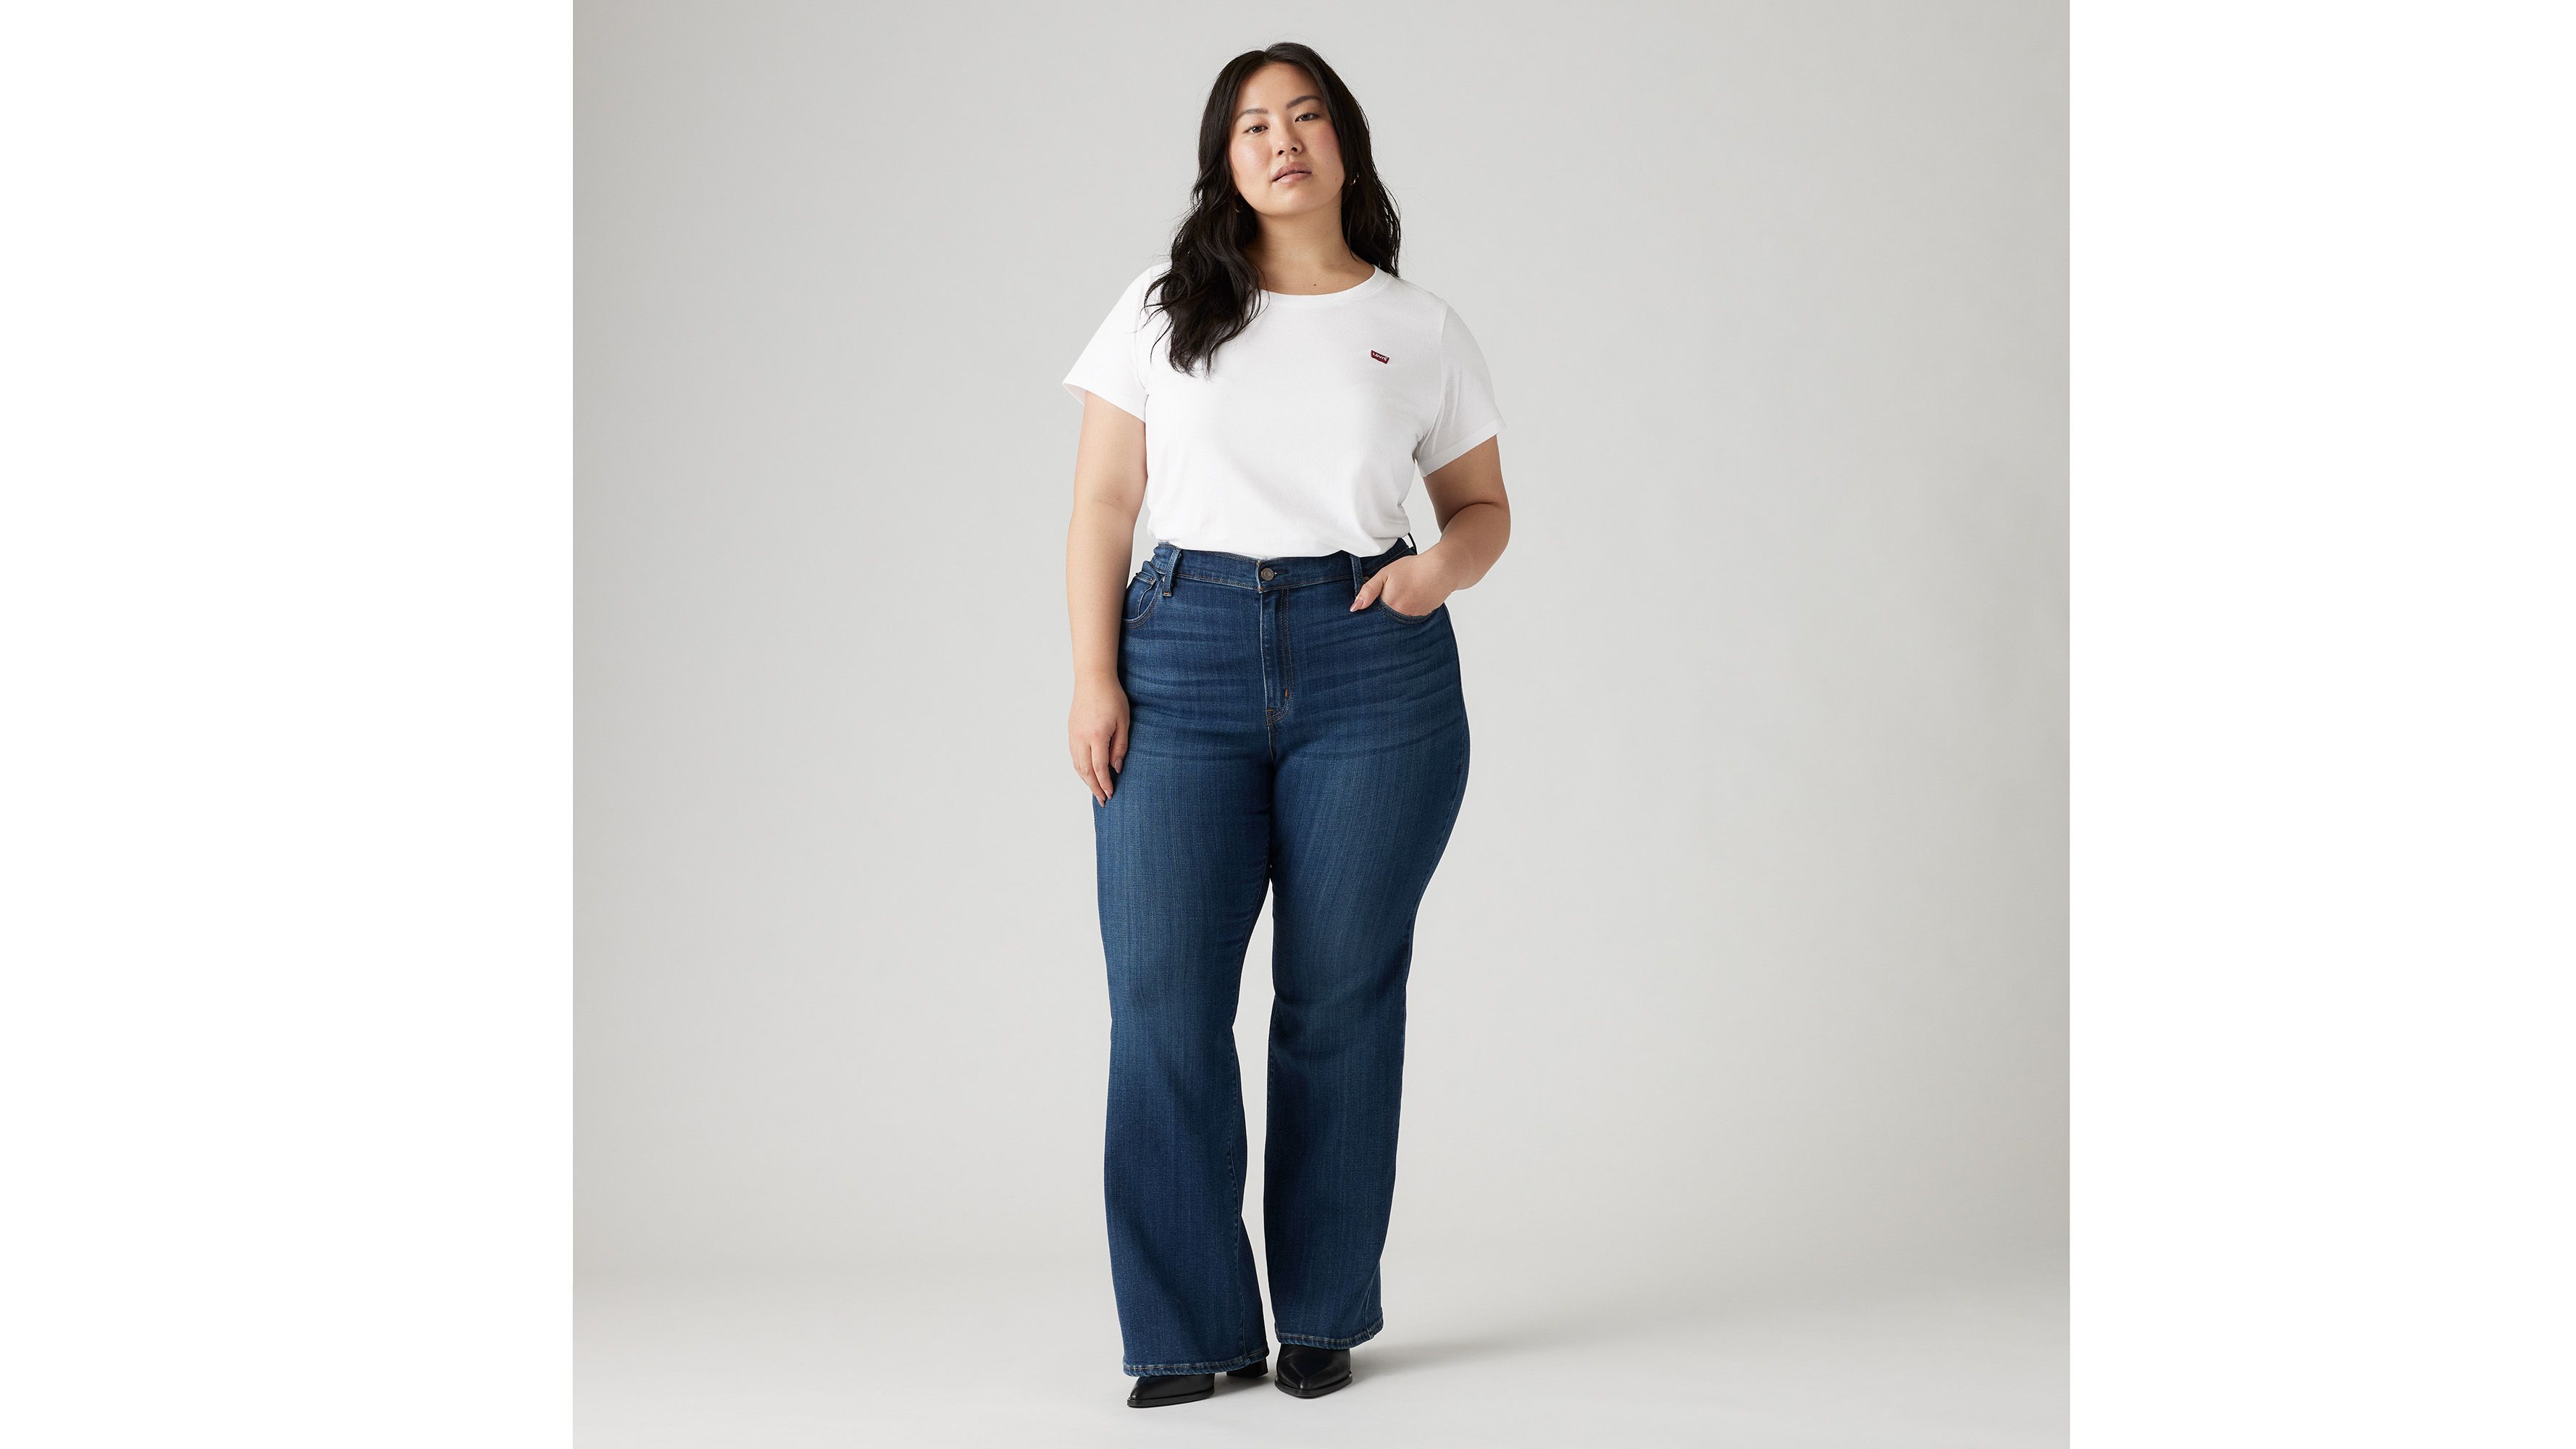 Buy High Note High Rise Flare Jeans Plus Size for CAD 129.00